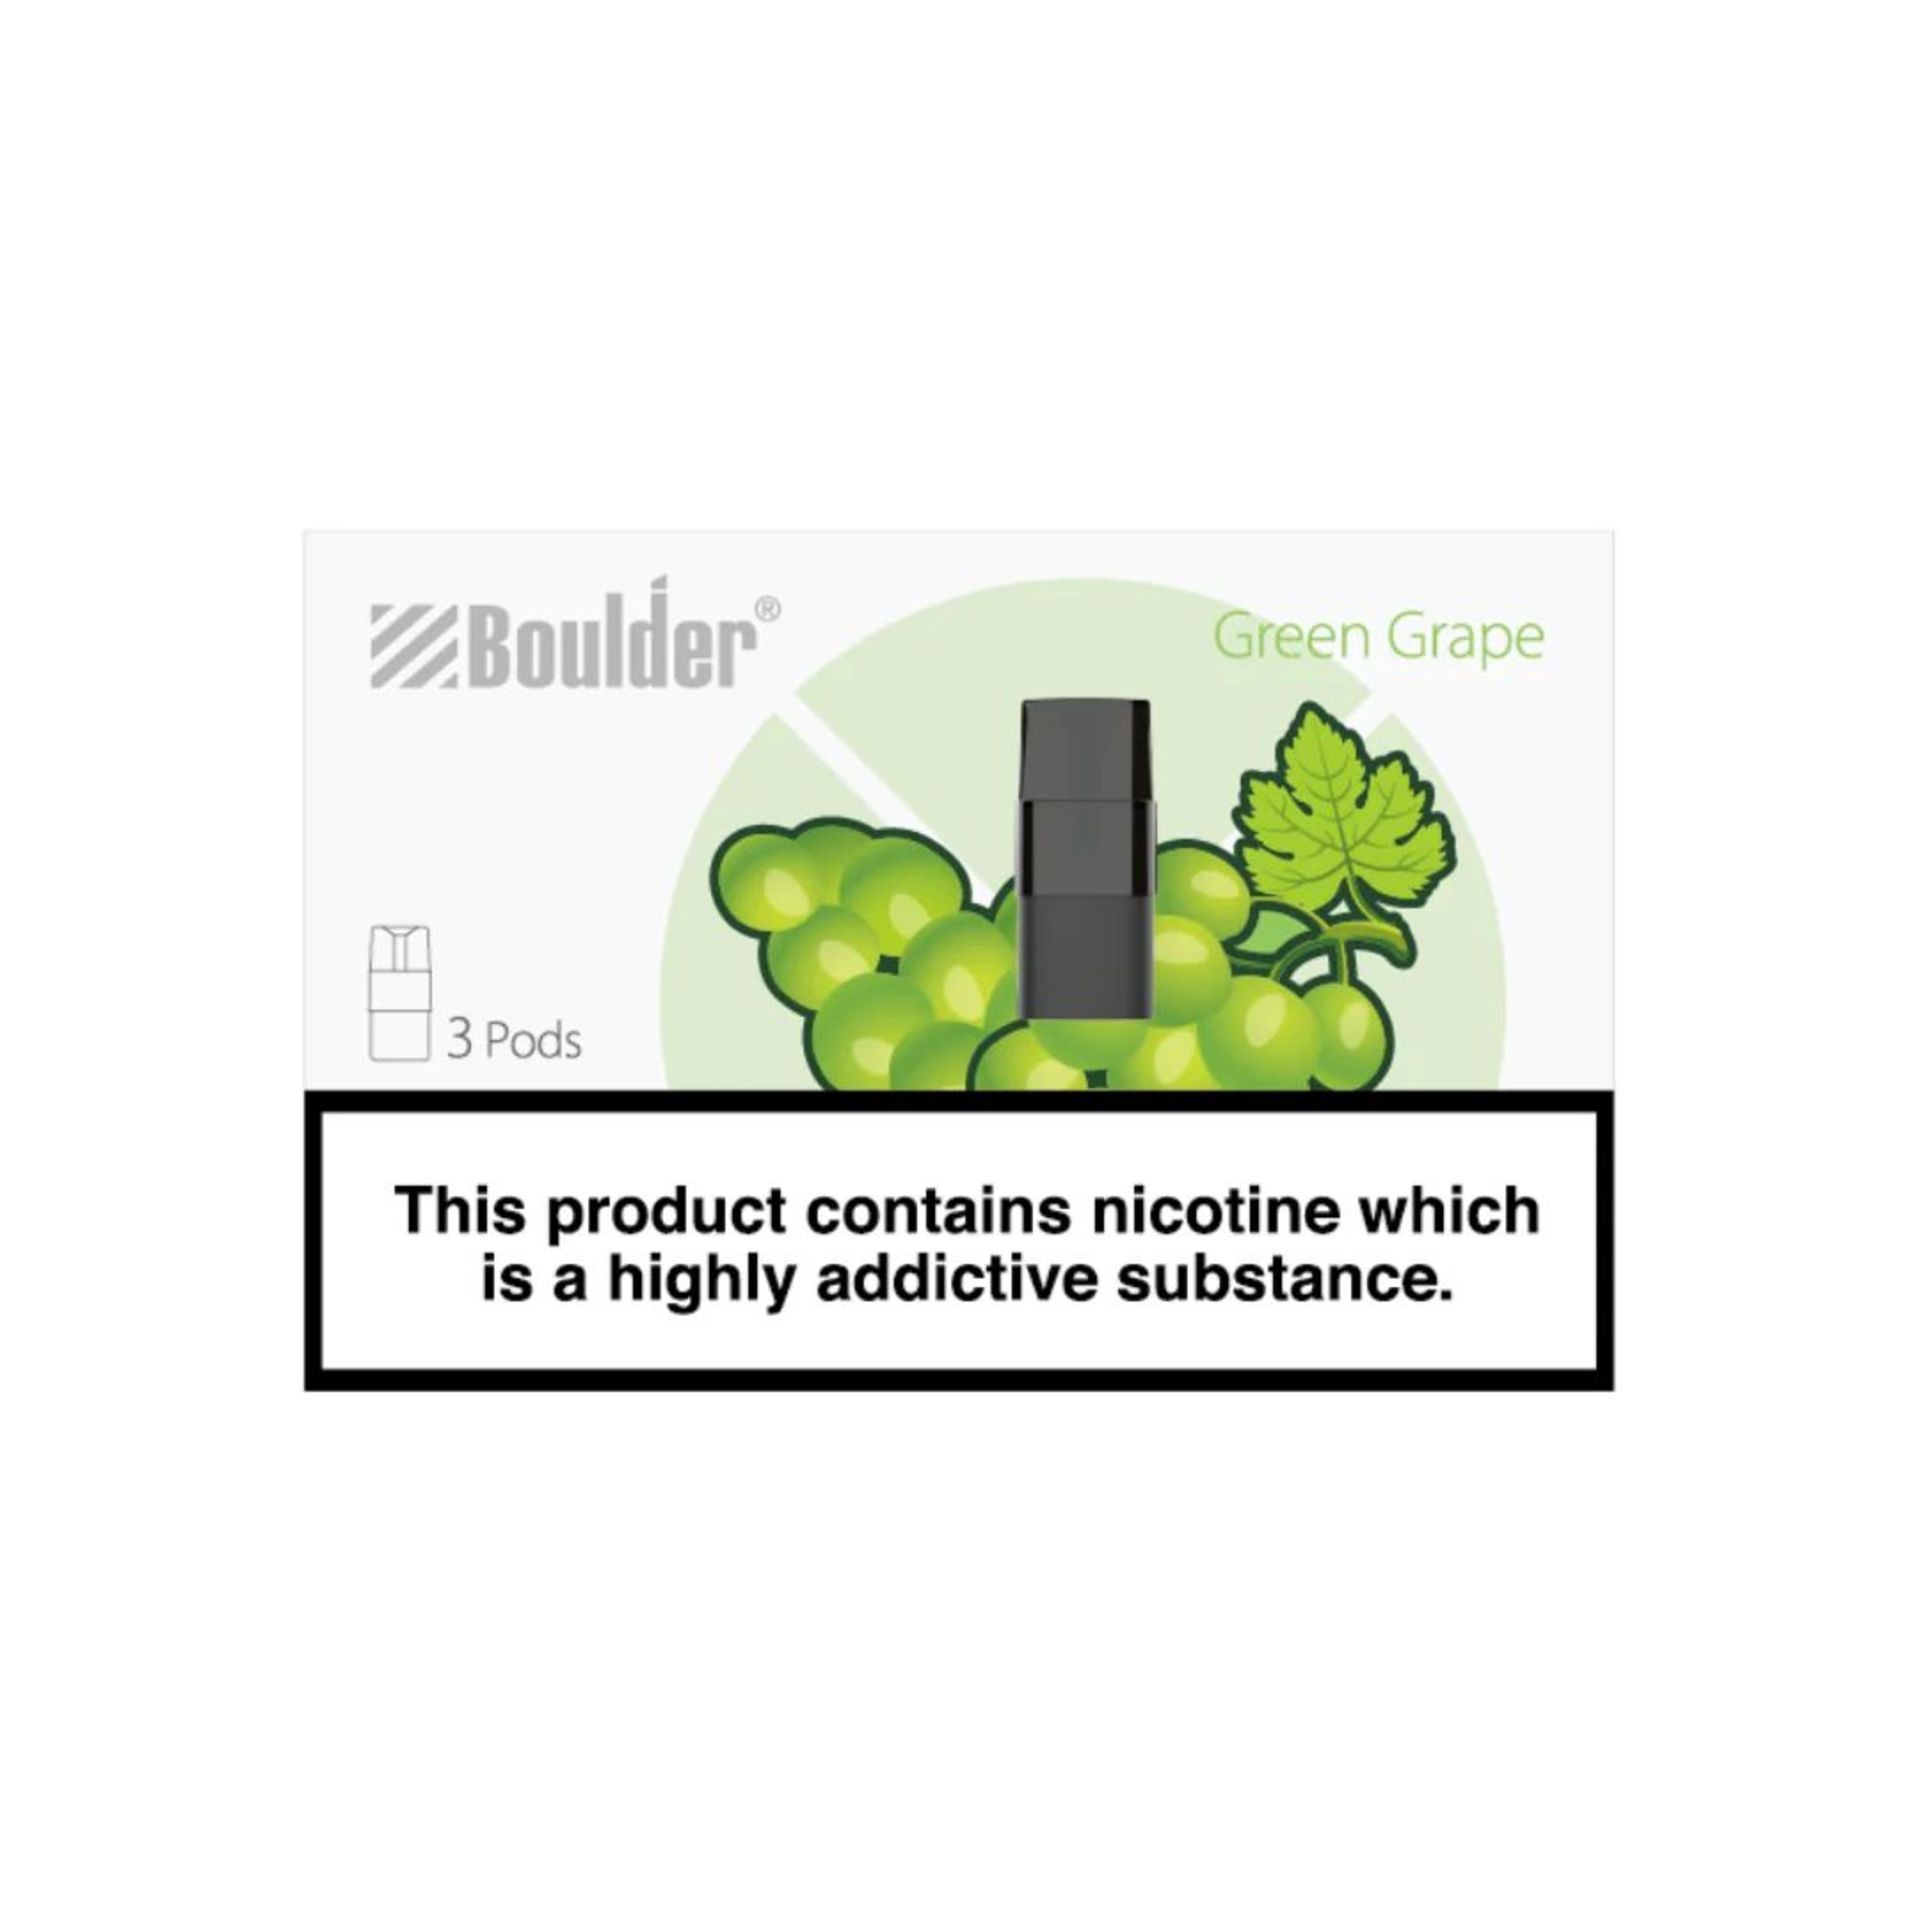 150 X BRAND NEW PACKS OF 3 BOULDER VAPE PODS (FLAVOURS MAY VARY) S1R7